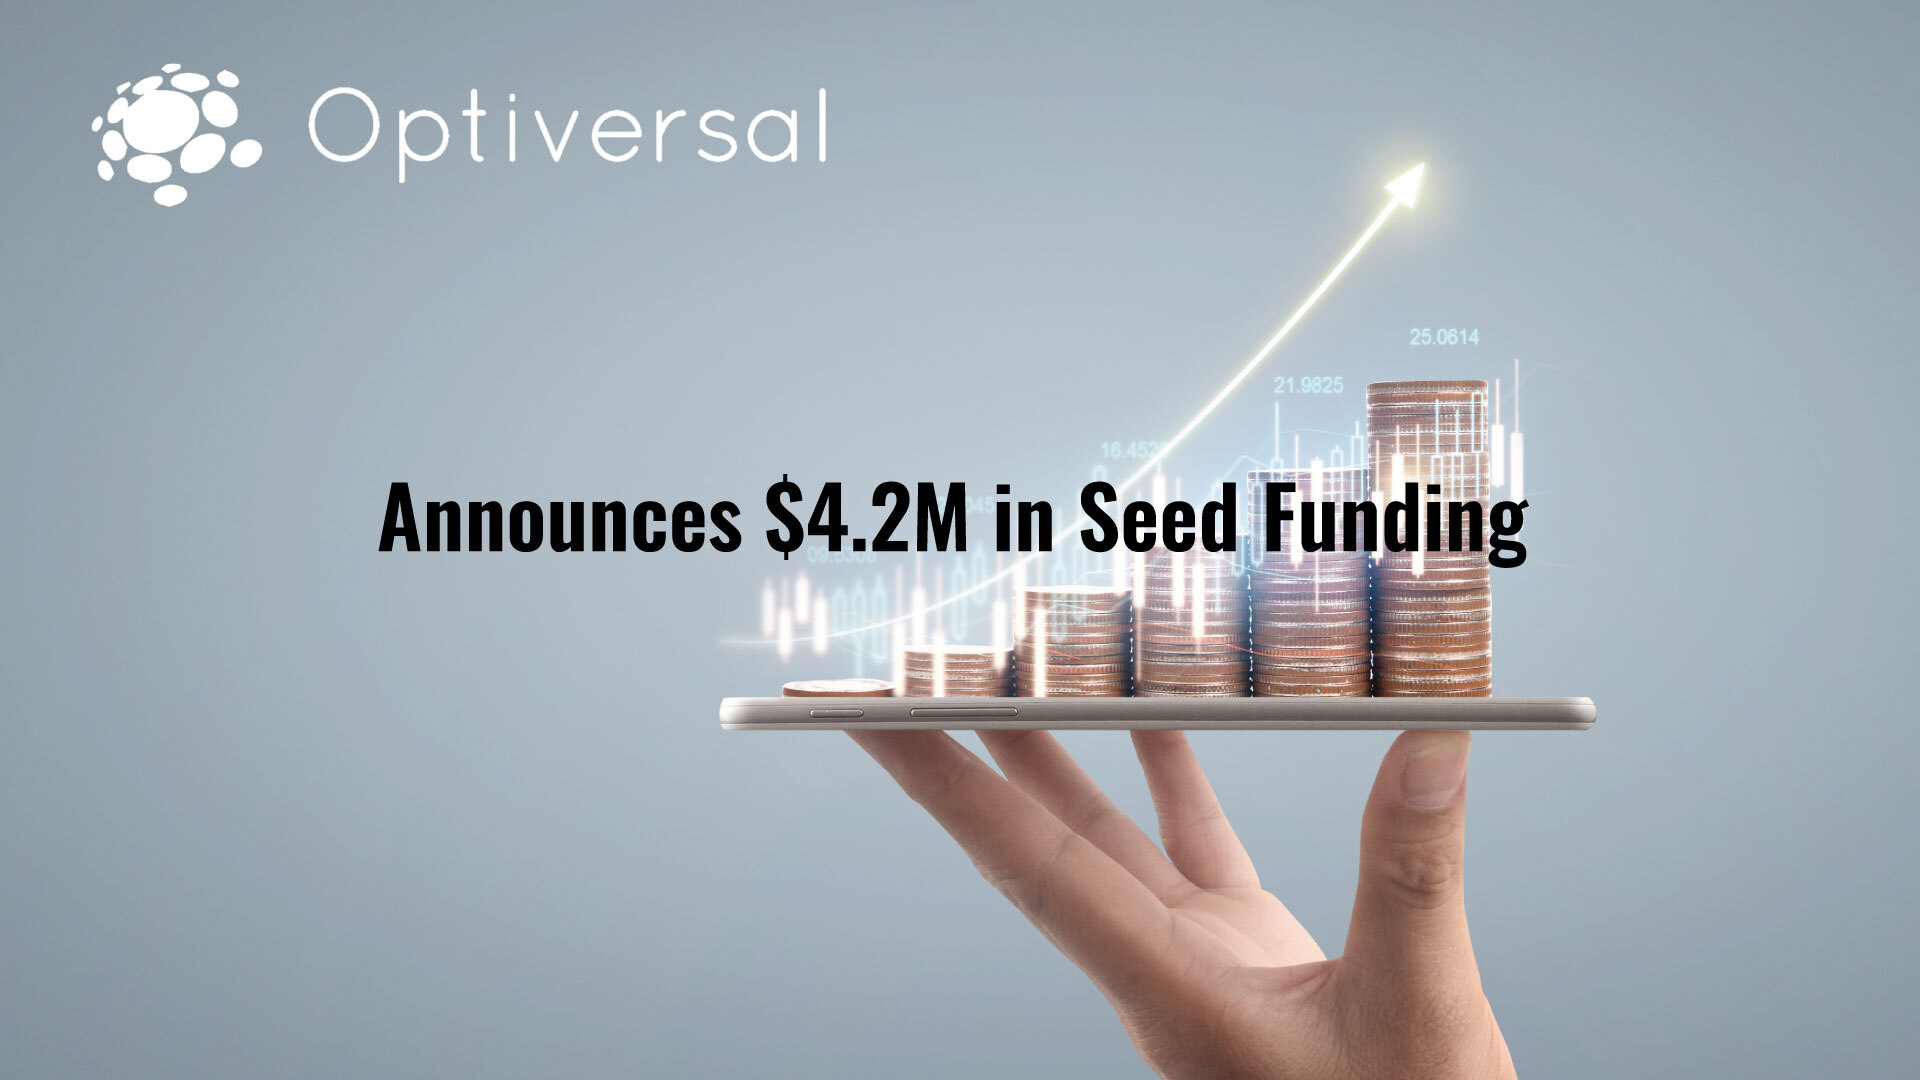 Optiversal Announces $4.2M in Seed Funding to Power Retailer Content with Generative AI